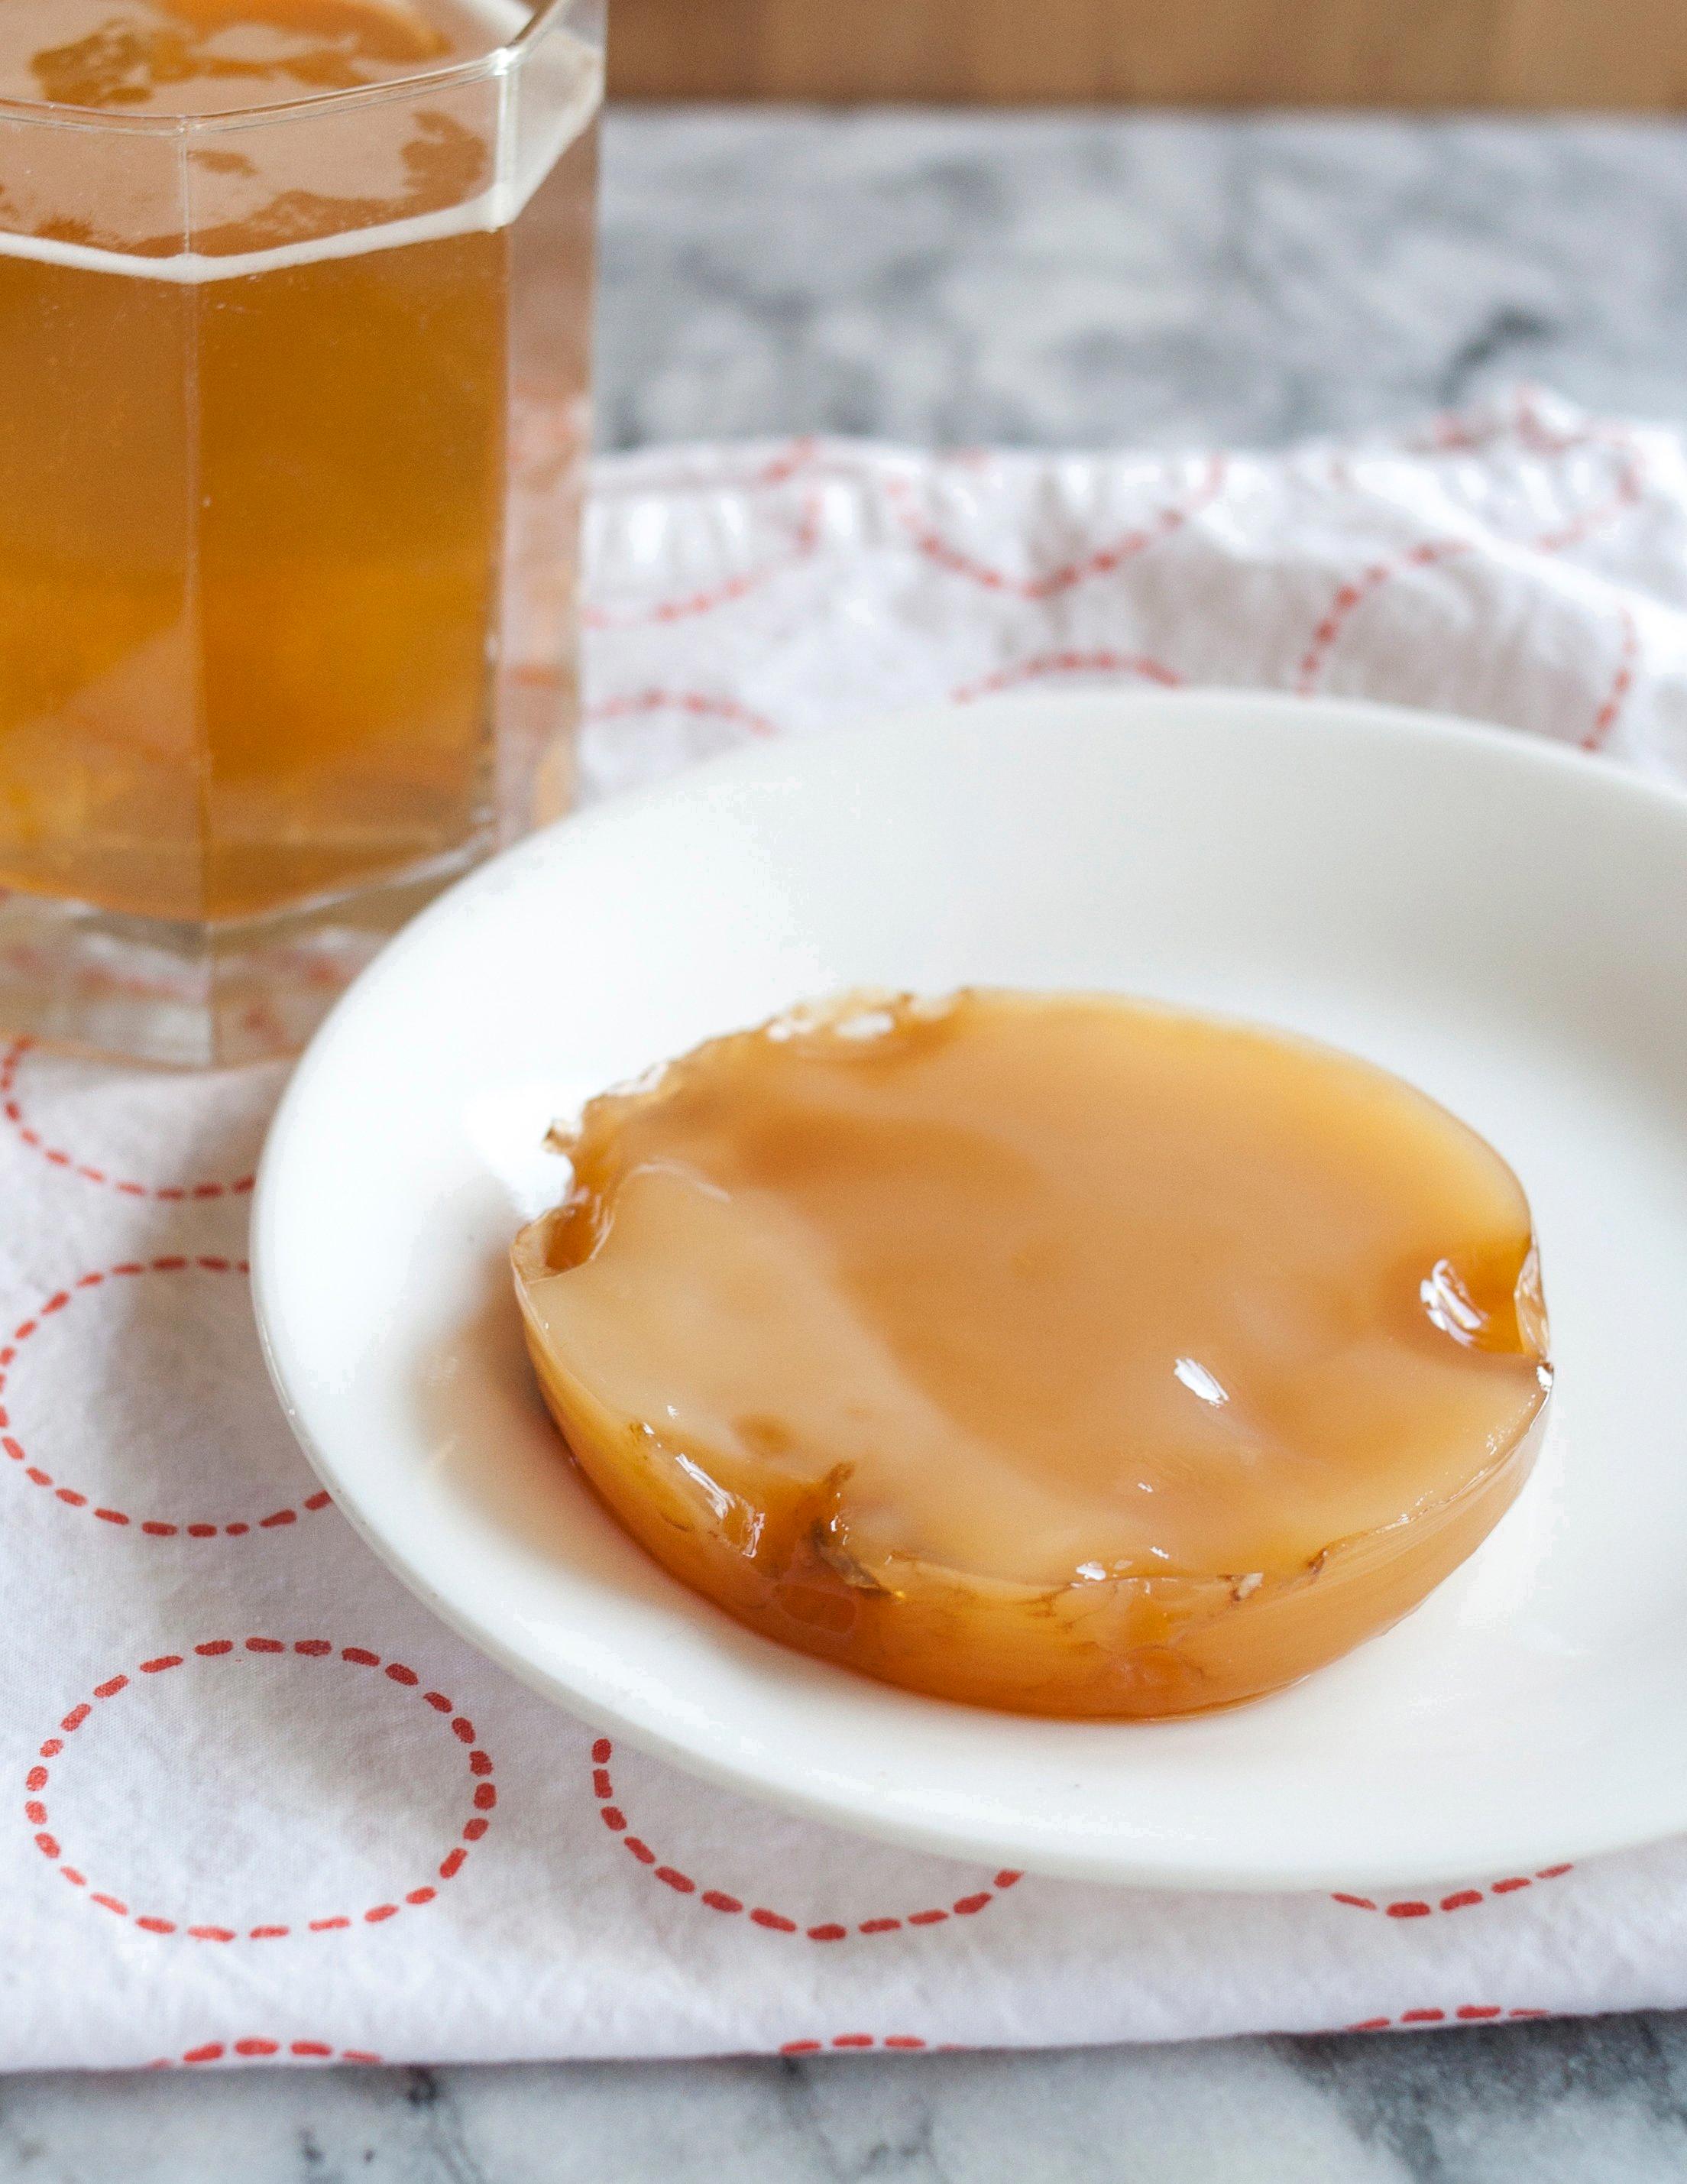 where does scoby come from